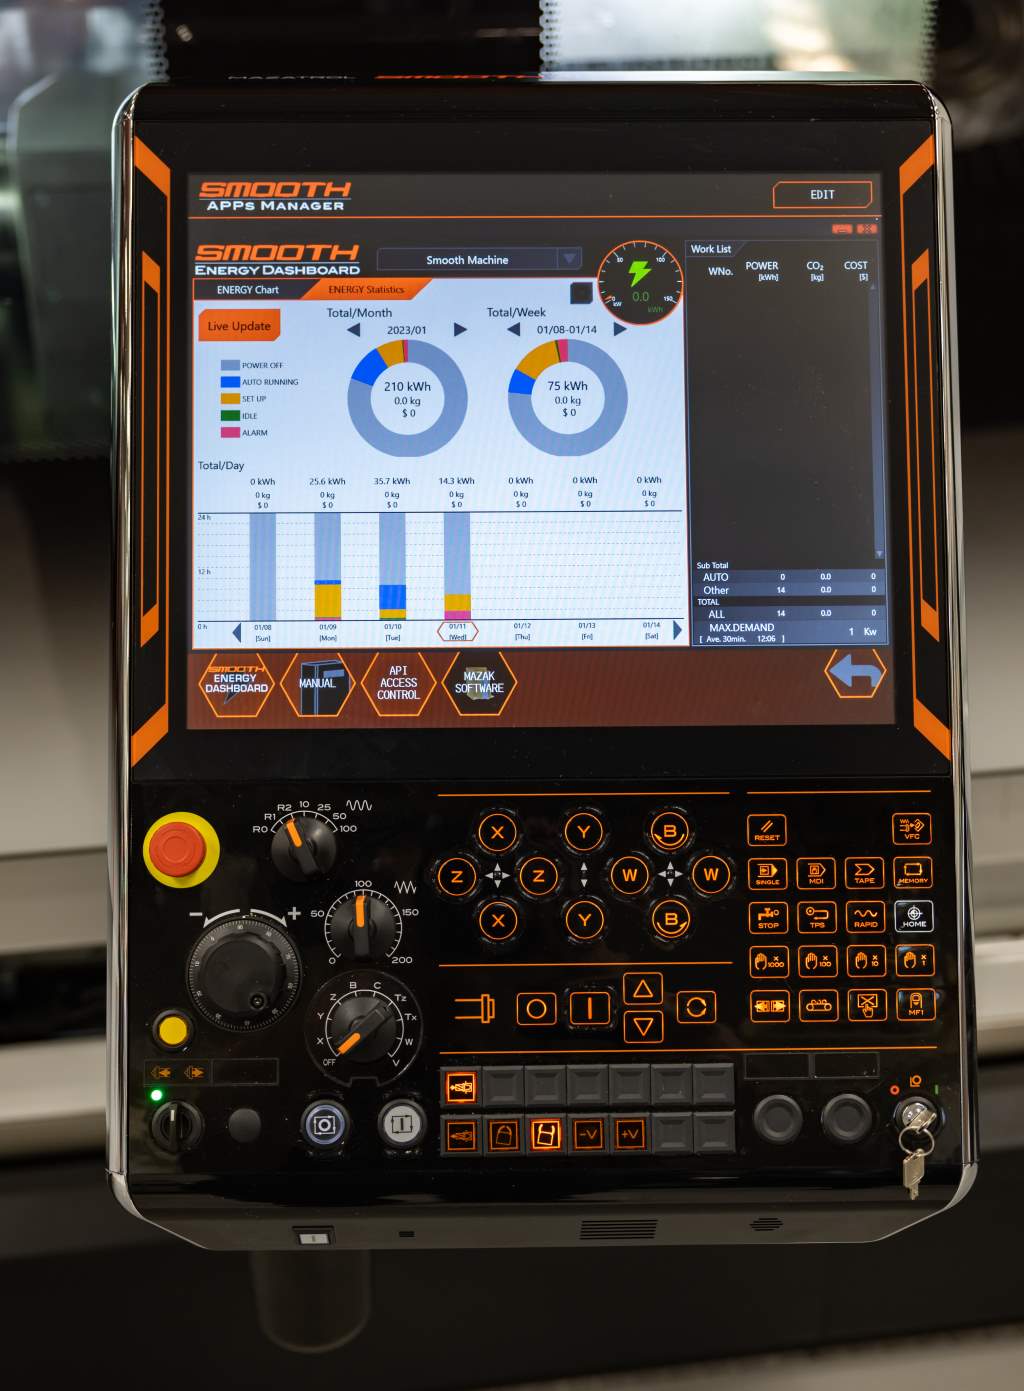 Mazak’s Smooth Energy Dashboard displays a range of power consumption metrics, including tonnage of CO2, electricity charges and daily peak power